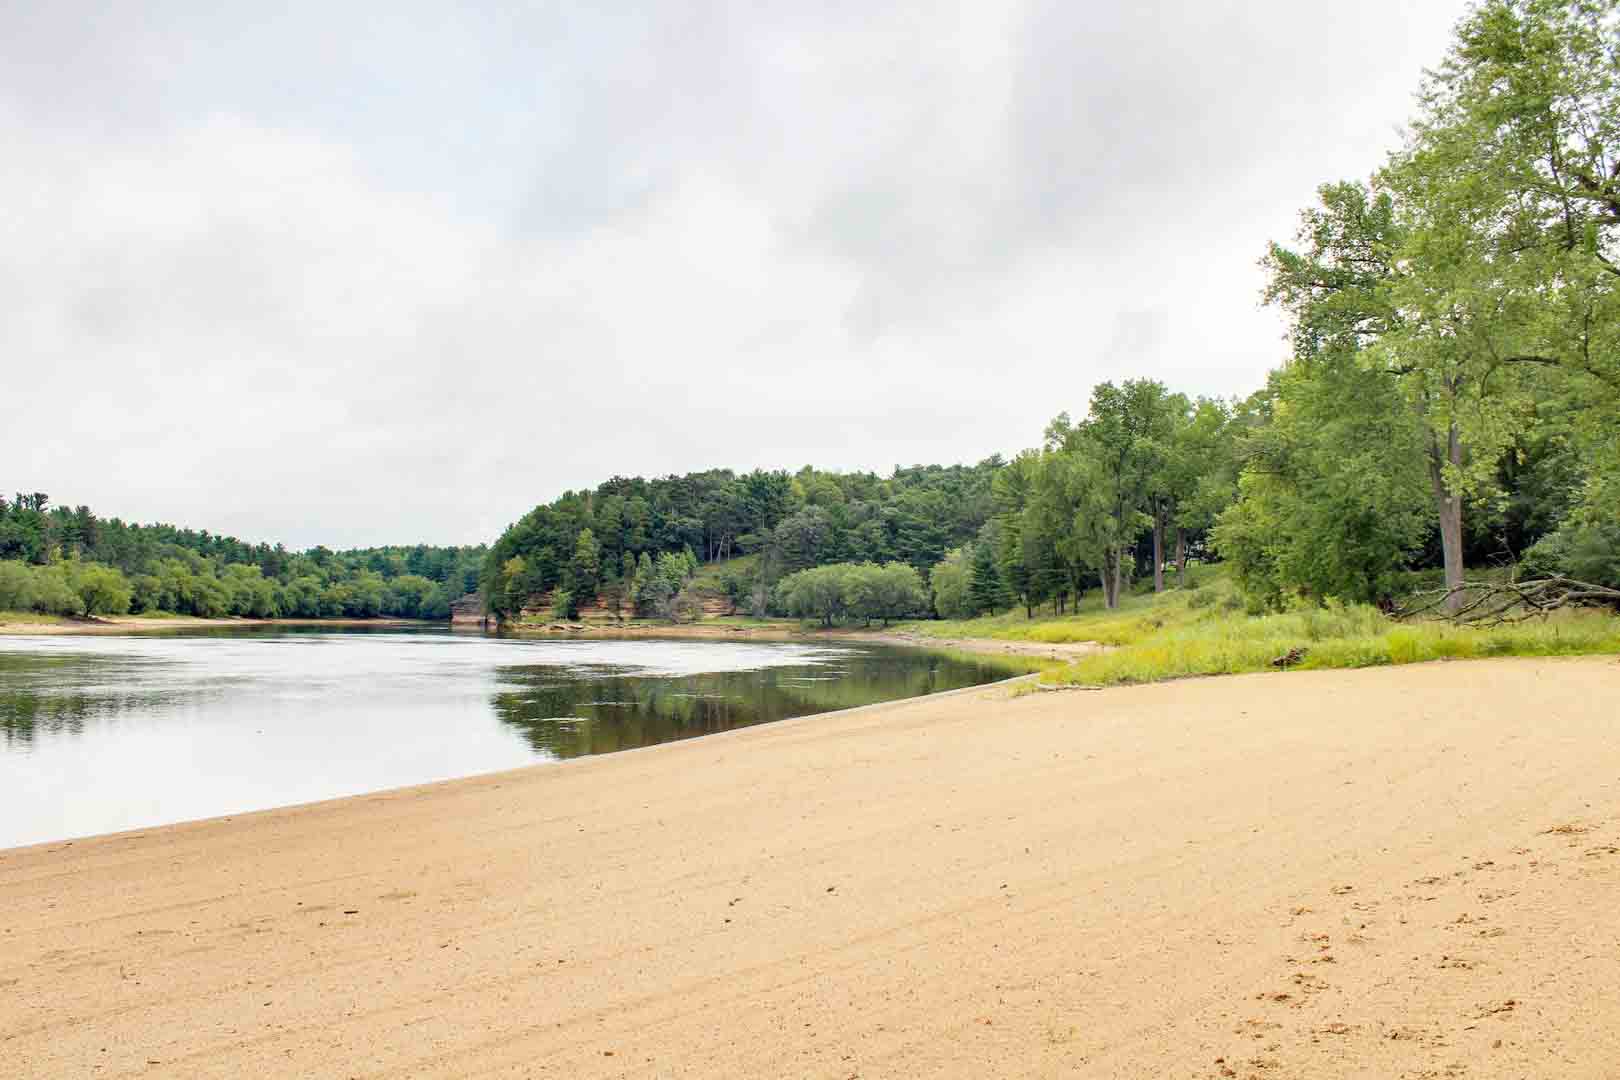 Beach on Wisconsin River